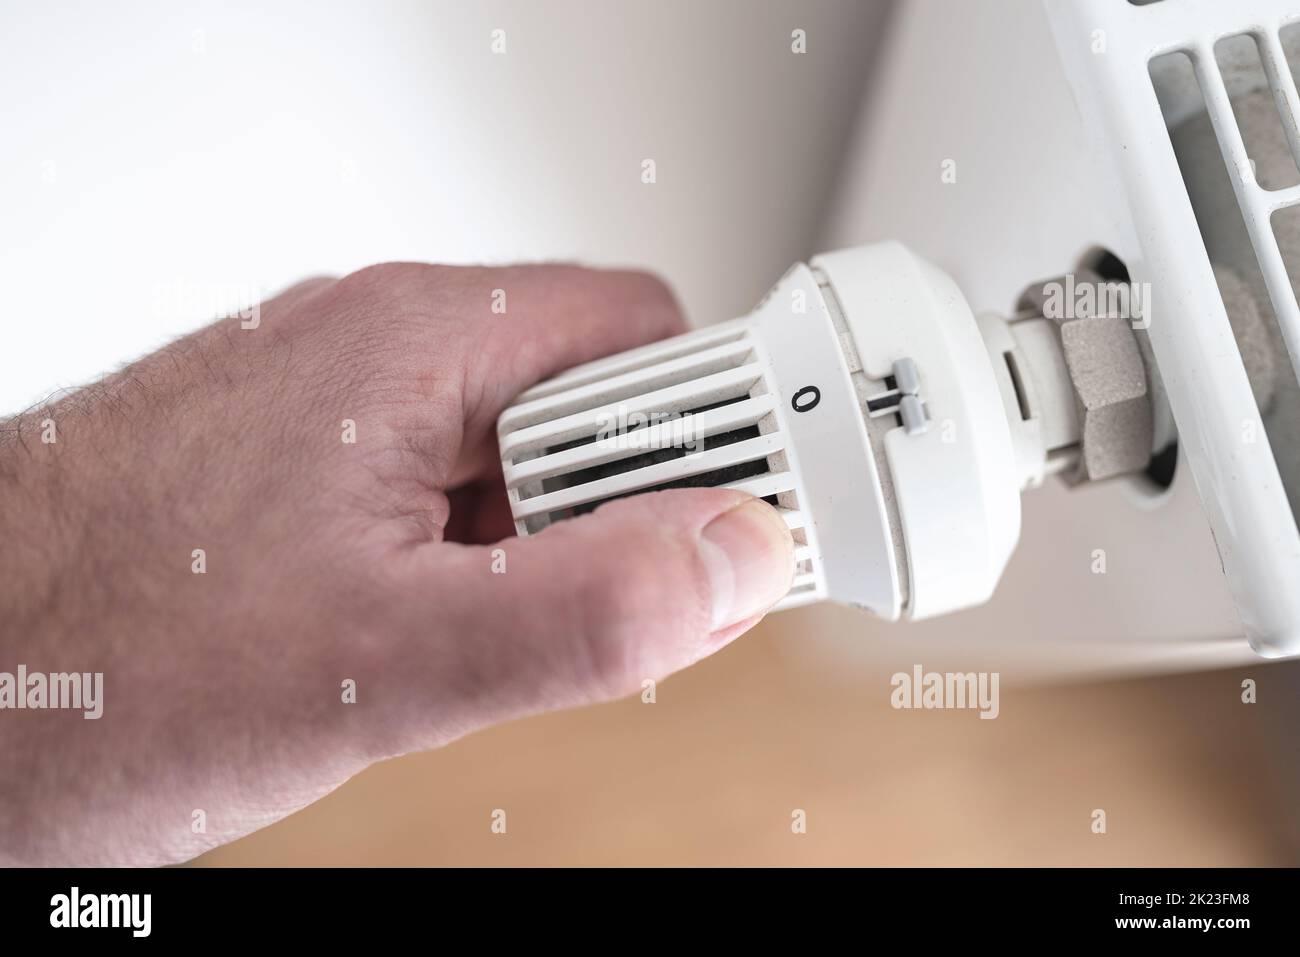 close-up view of person turning down thermostat on radiator to zero to save energy and money, rising energy and heating costs concept Stock Photo